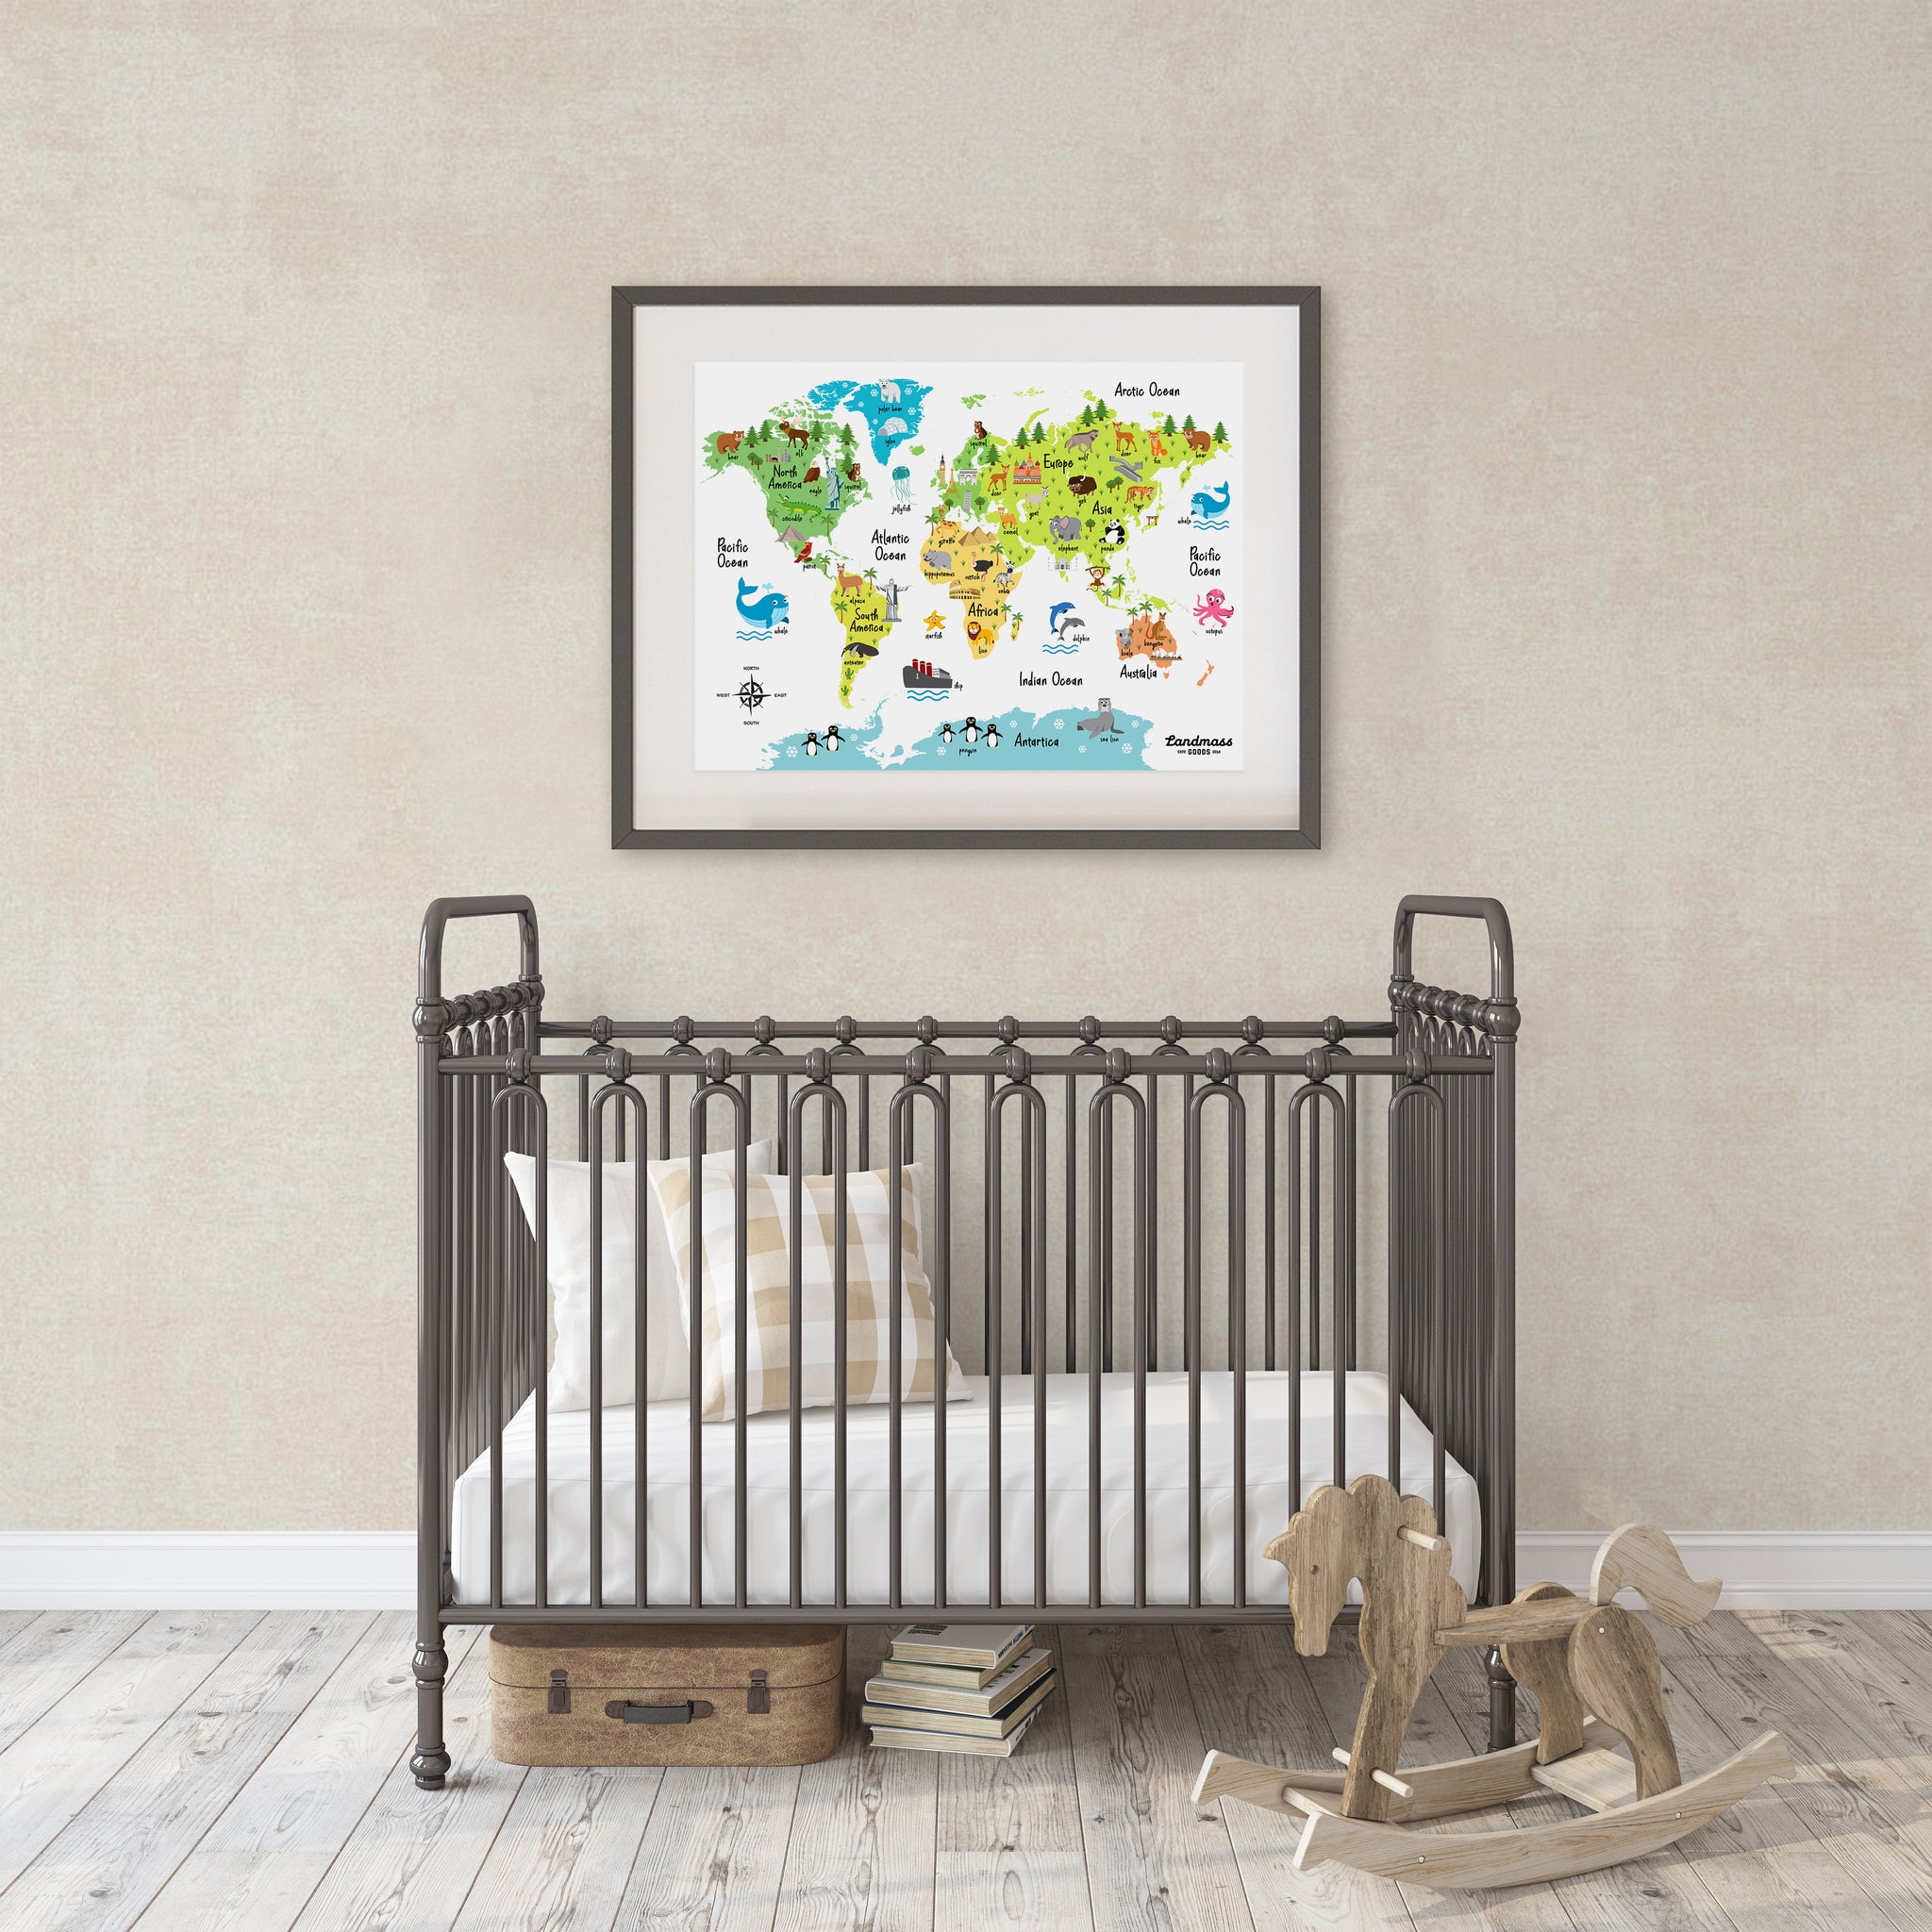 Colorful Children's Animal World Map Poster - 18x24 inches